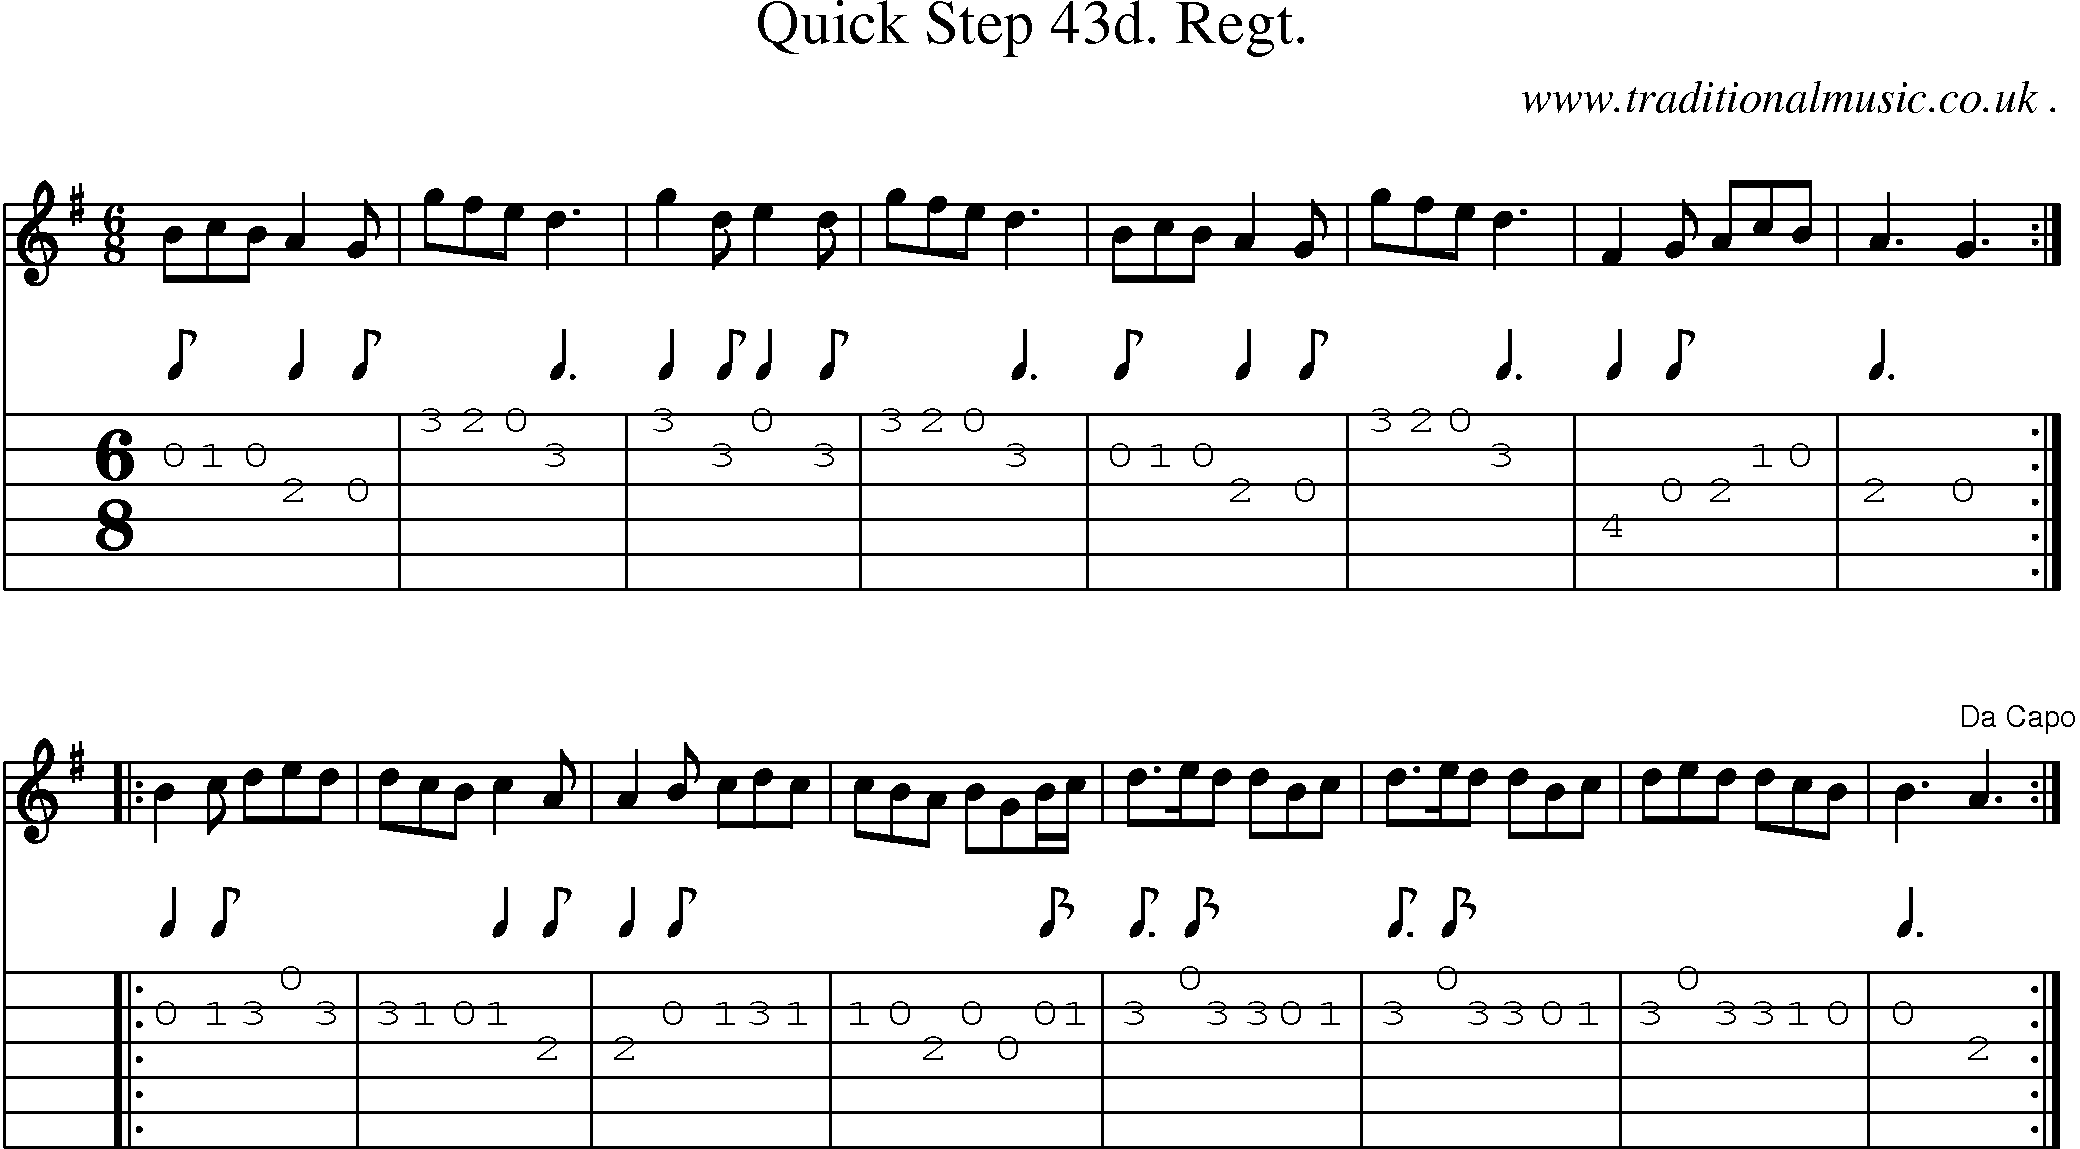 Sheet-music  score, Chords and Guitar Tabs for Quick Step 43d Regt